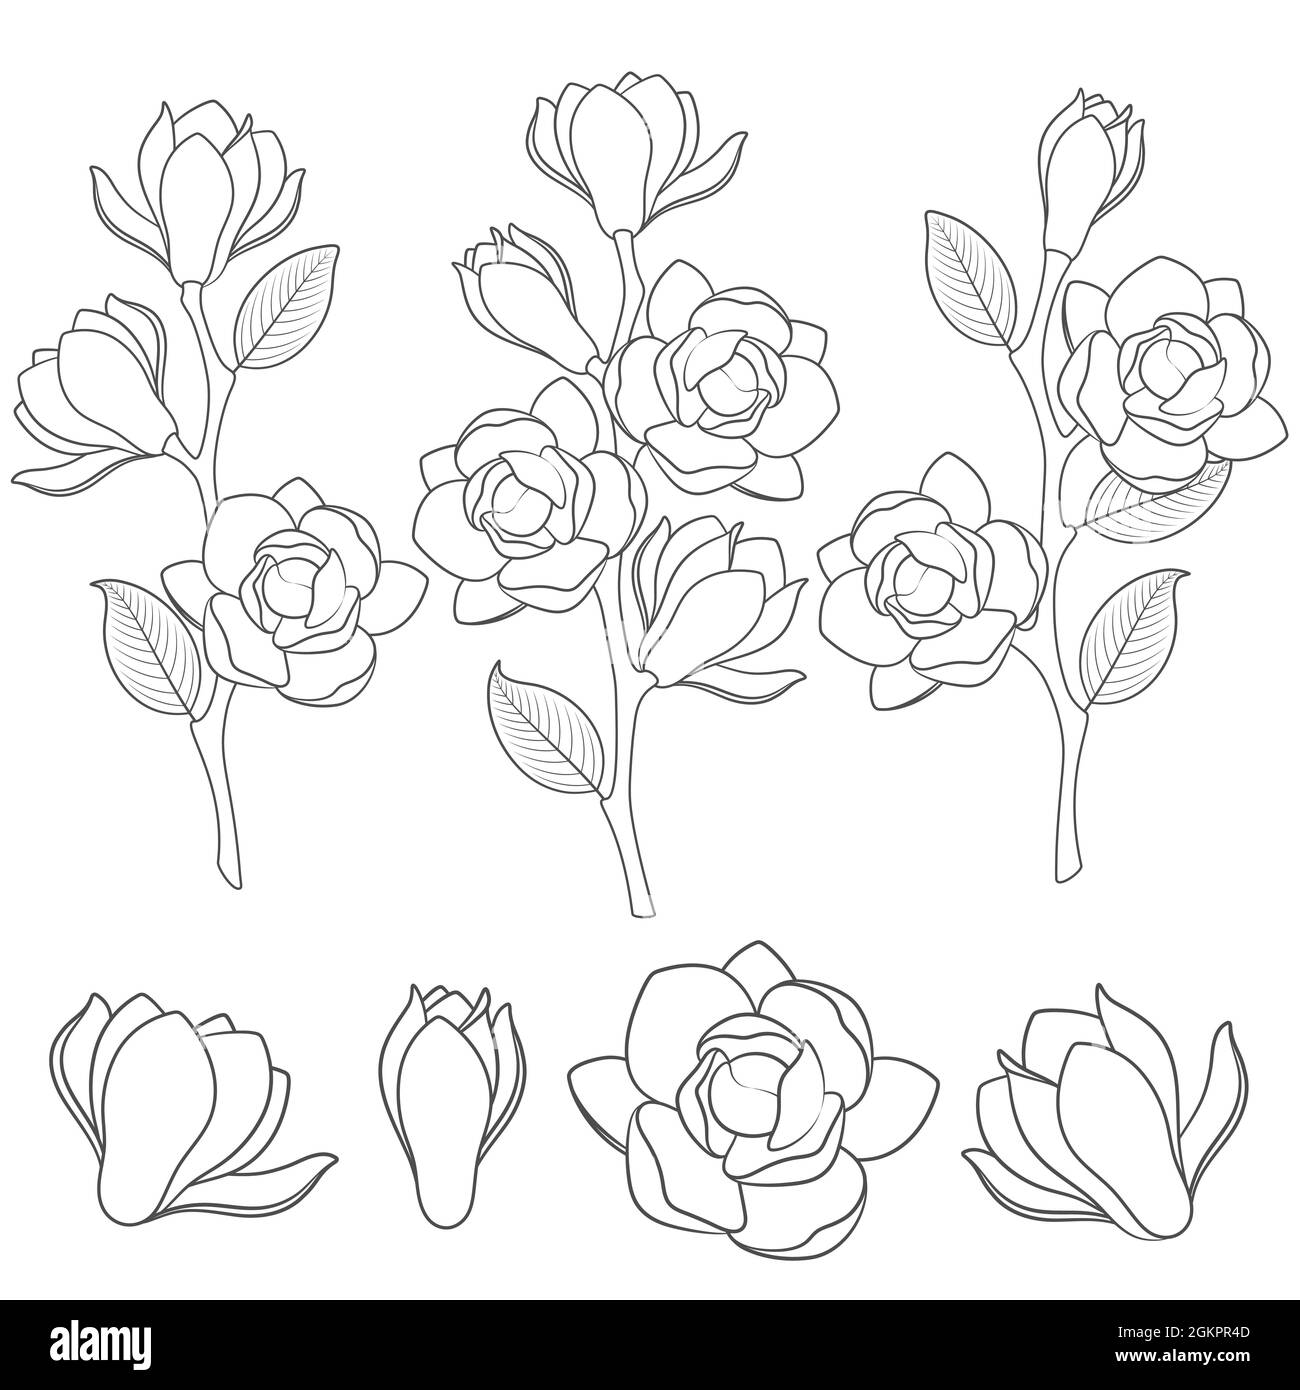 Set of black and white illustrations with flowering magnolia branches. Isolated vector objects on white background. Stock Vector